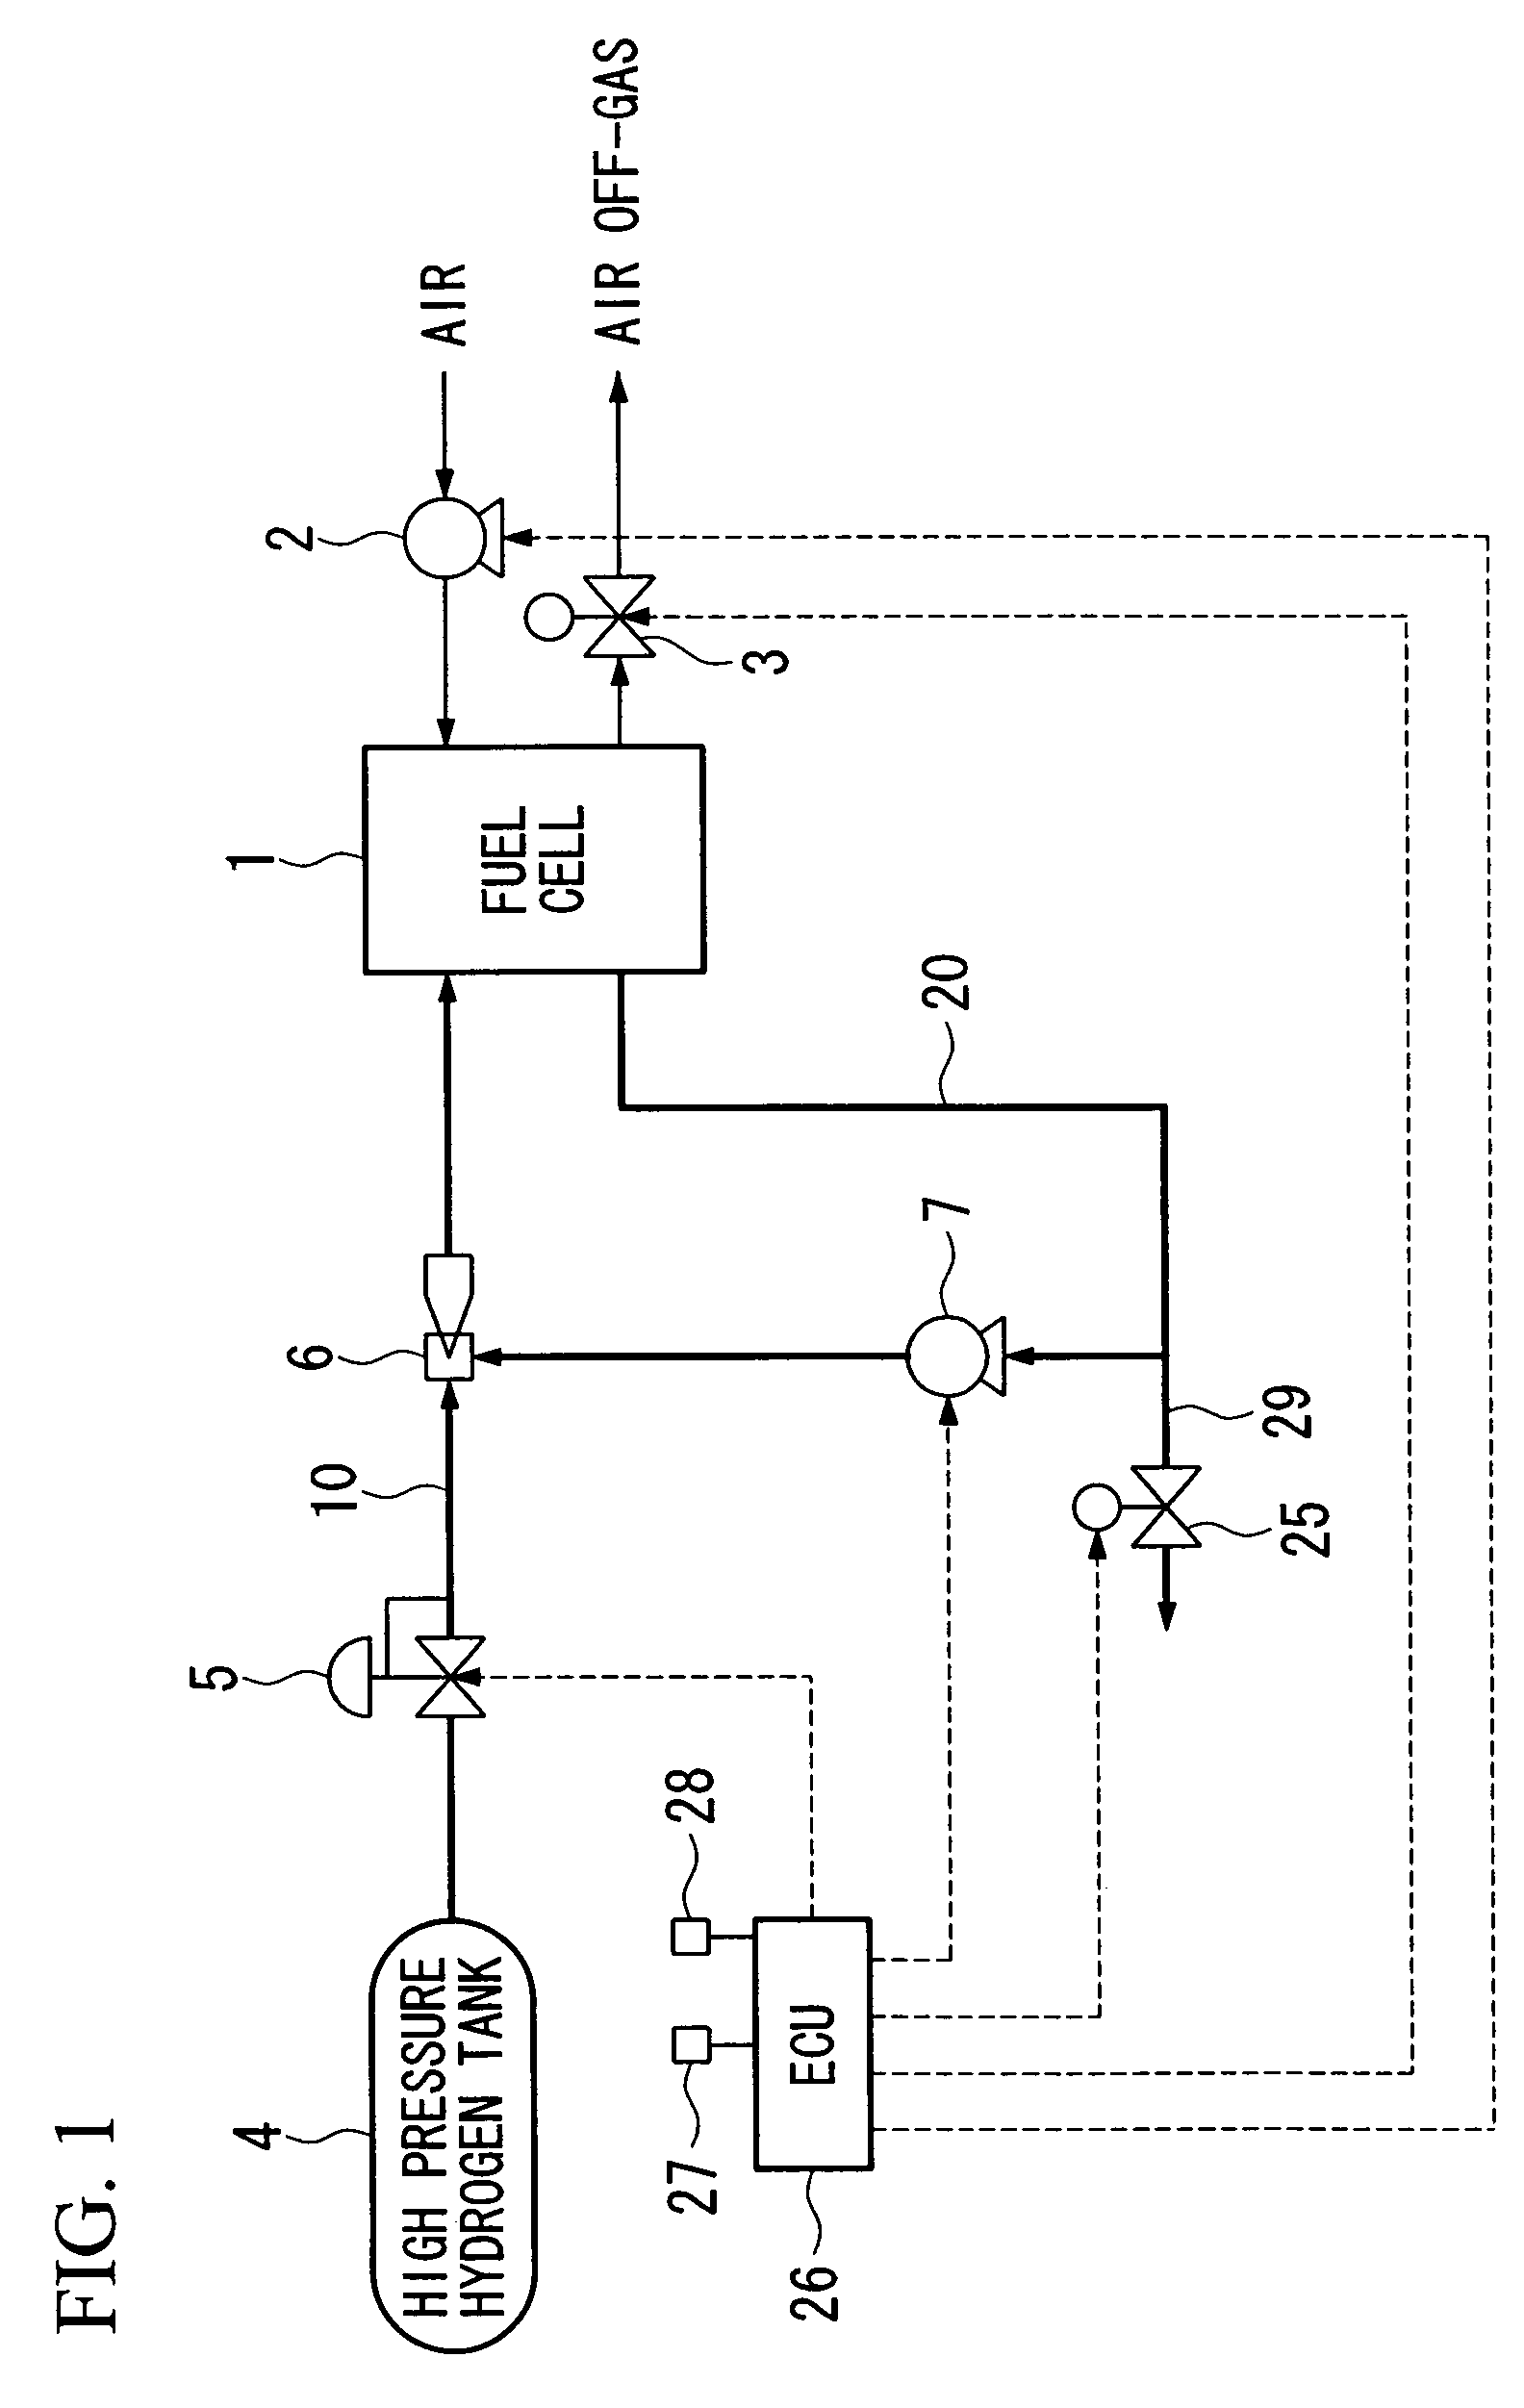 Fuel cell system programmed to control reactant gas flow in a gas circulation path